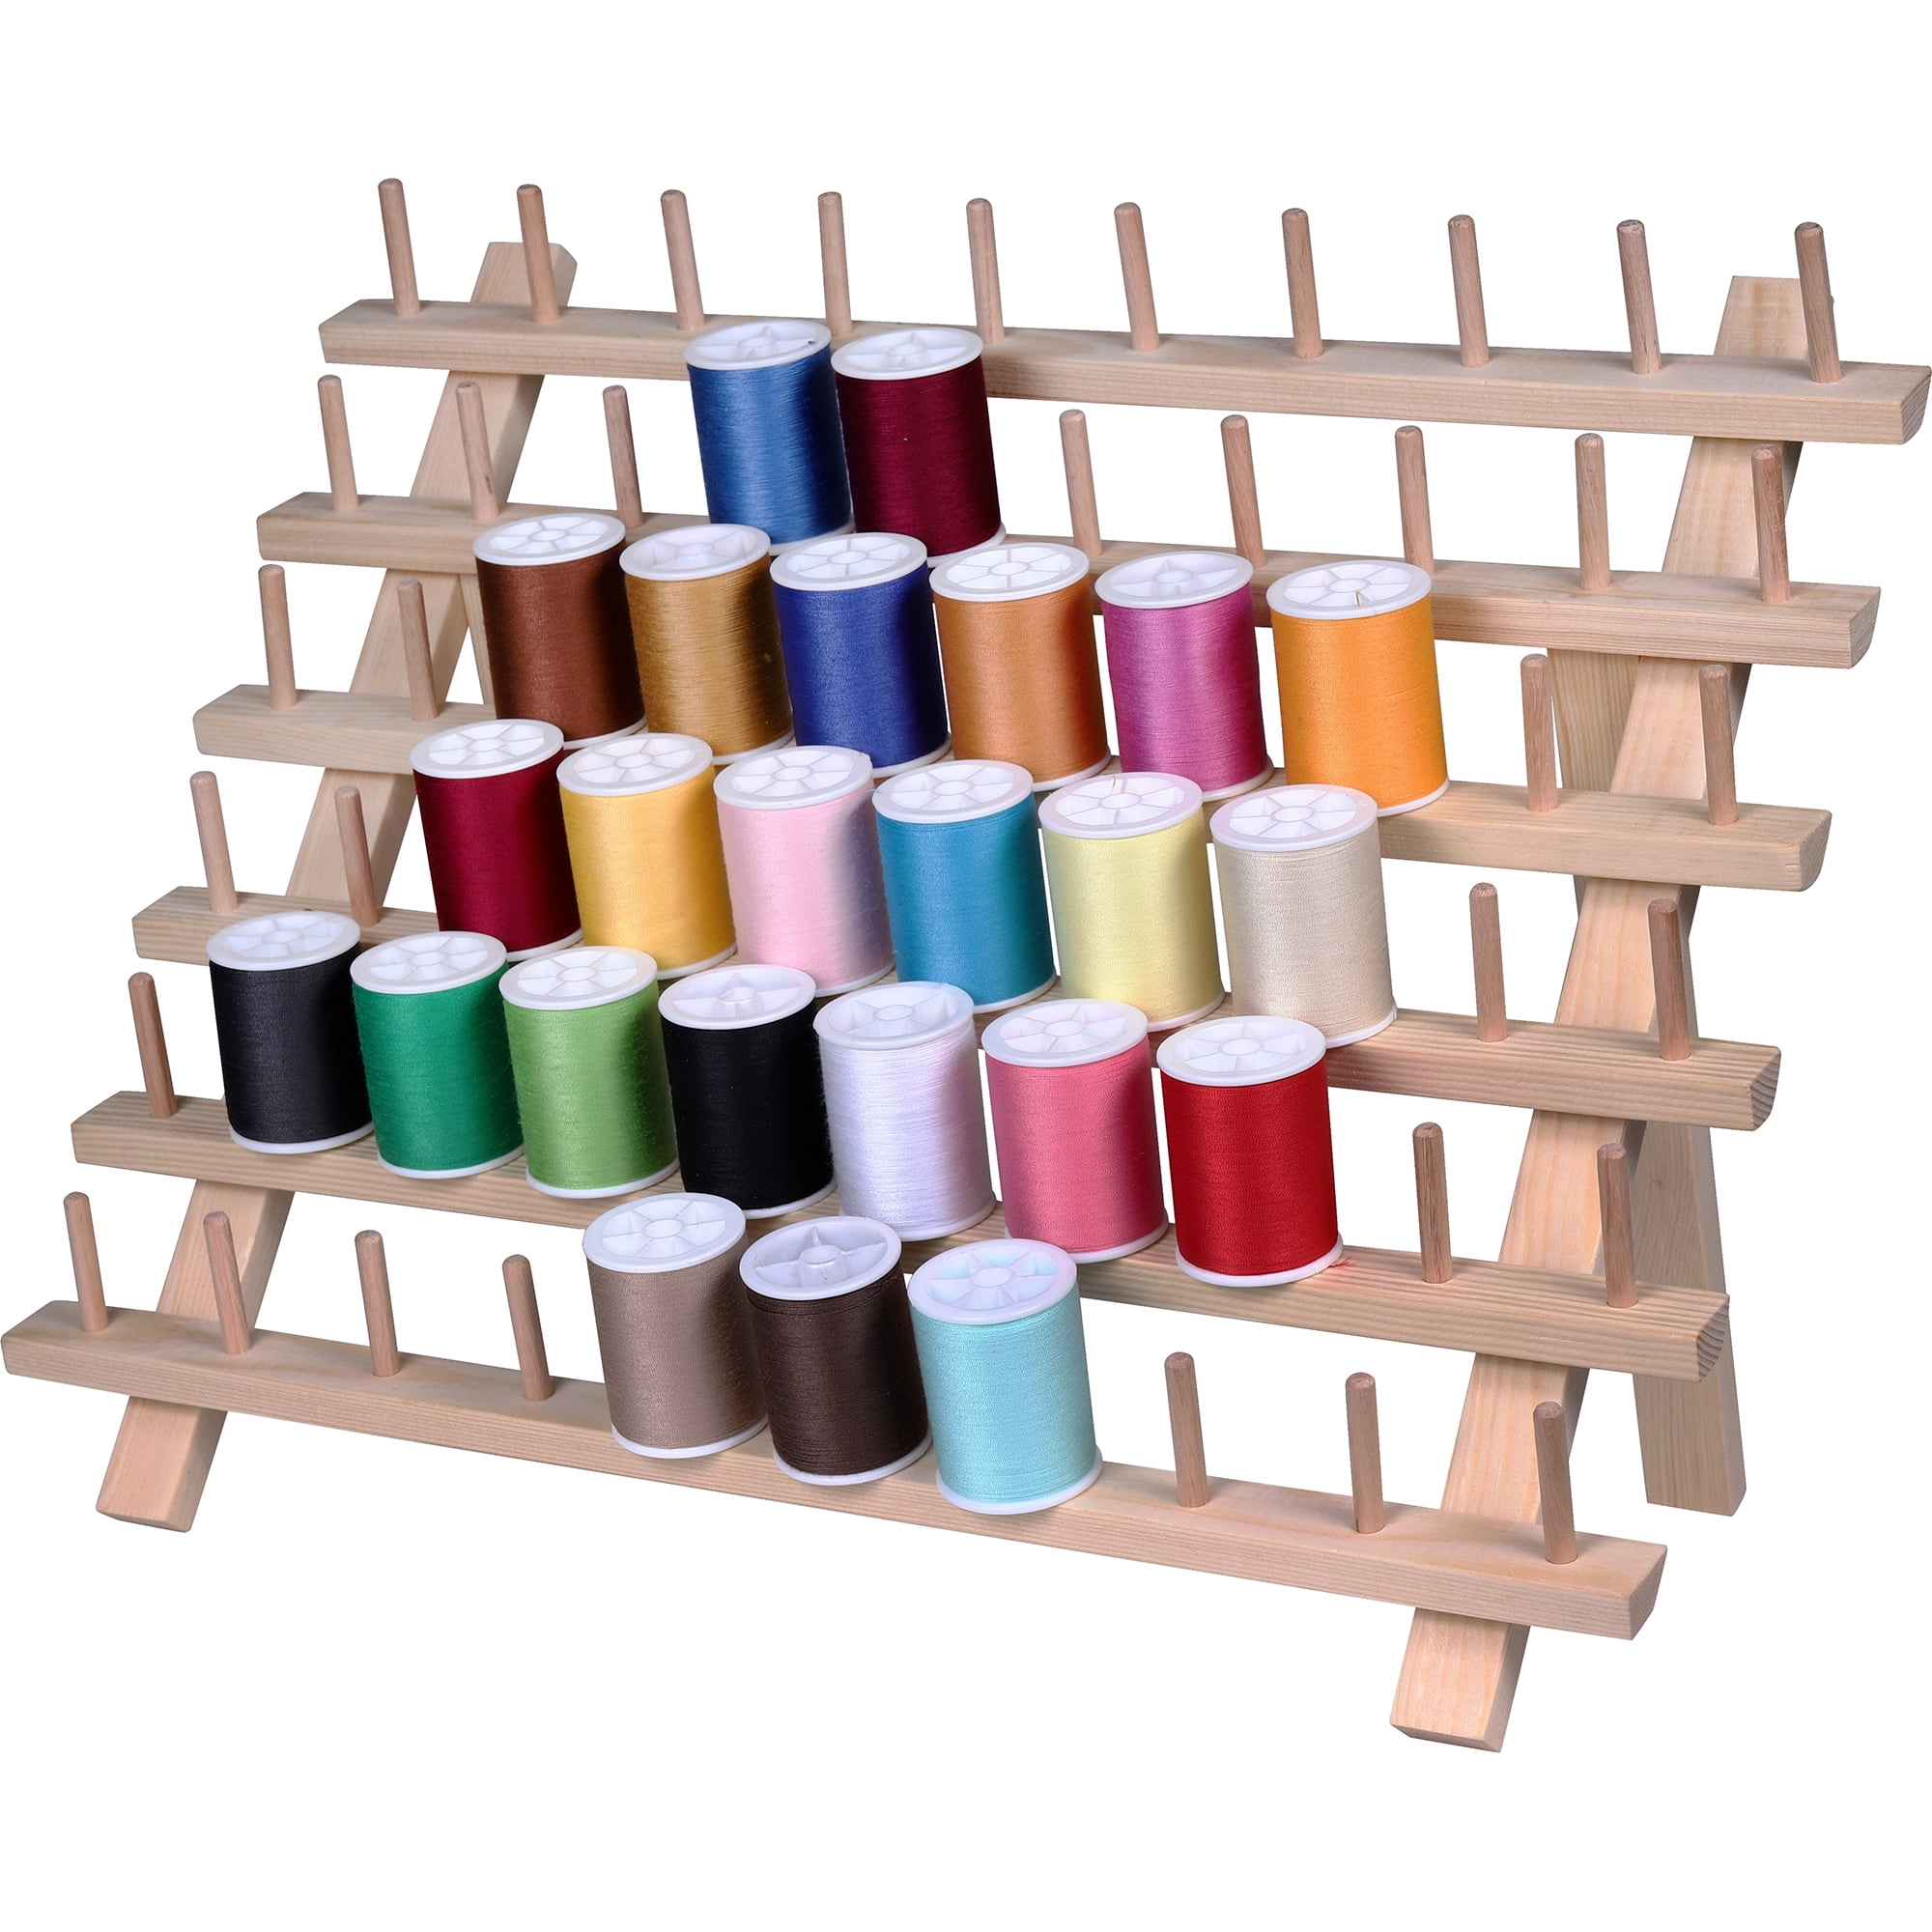 Sewing Thread Rack, Stable Lightweight Storage Holder Portable Wooden Thread  Holder Sewing Organizer for Quilting Hair Braiding Decorations 80 Spool 